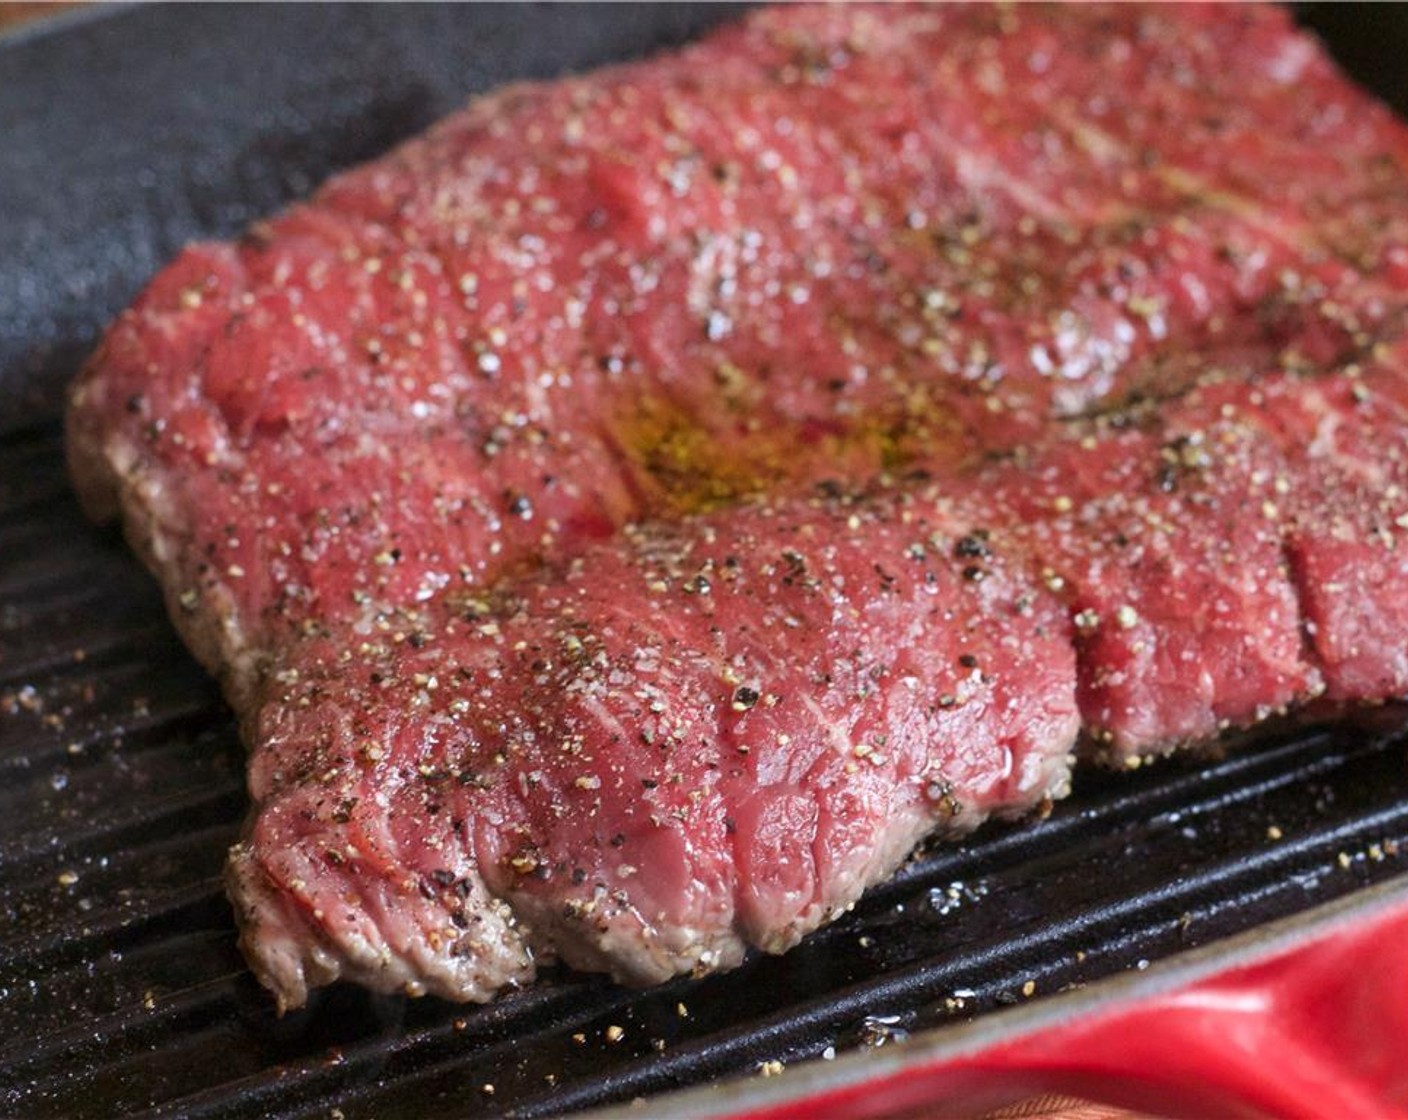 step 5 Sear the steak for 4 minutes per side. Remove from the pan when the internal temperature is 145 degrees F for medium rare.